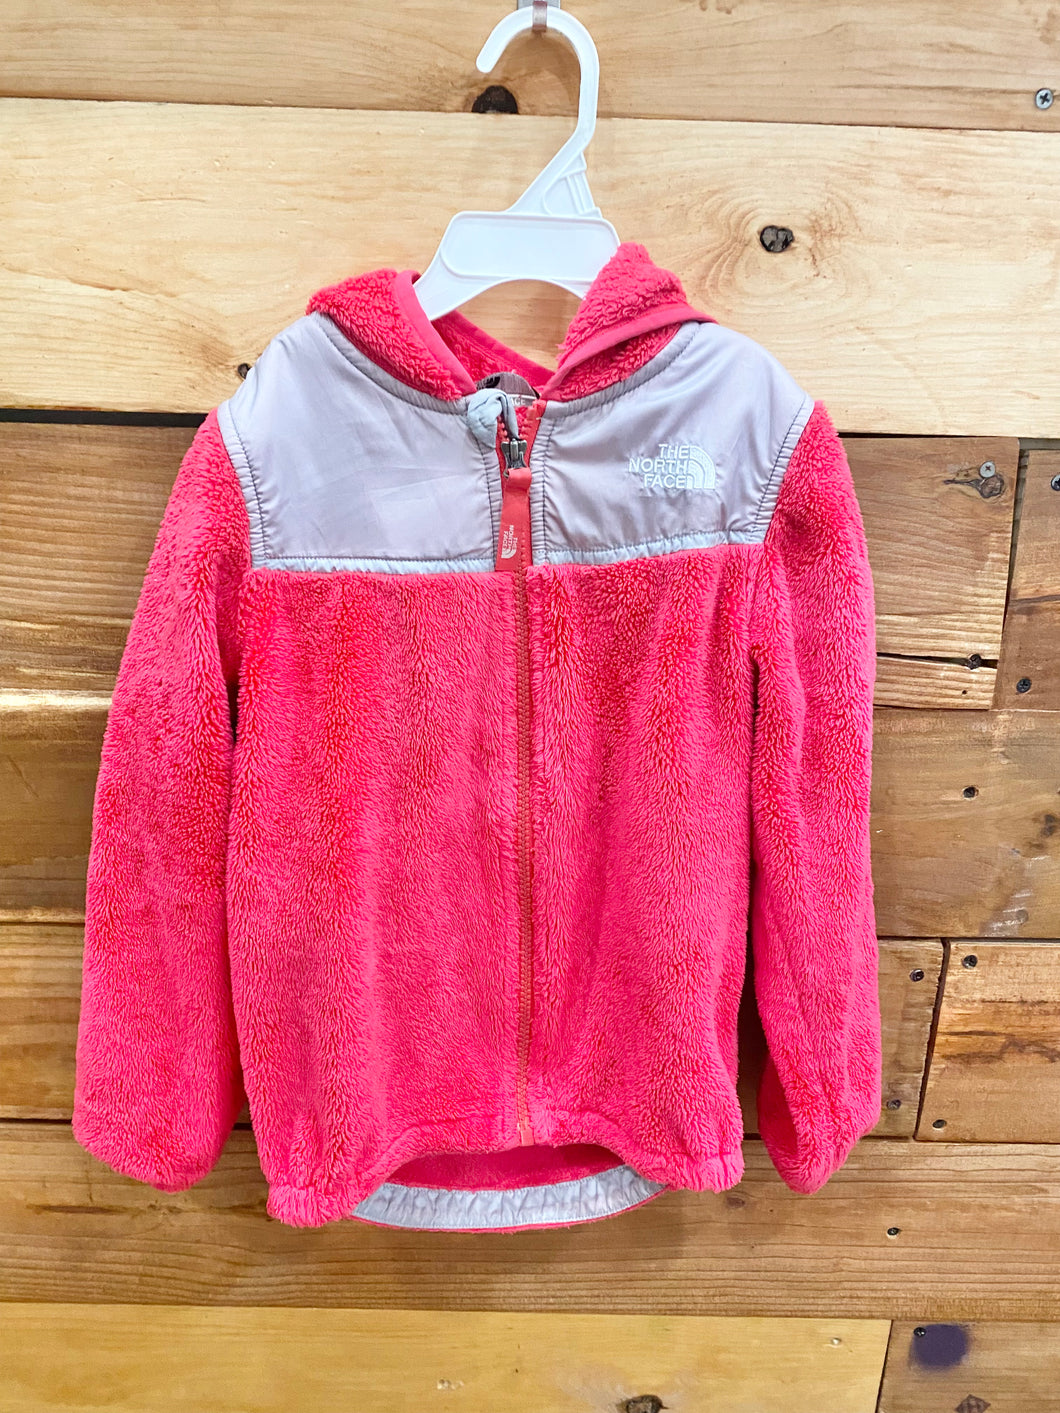 The North Face Bright Pink Fleece Jacket Size 5